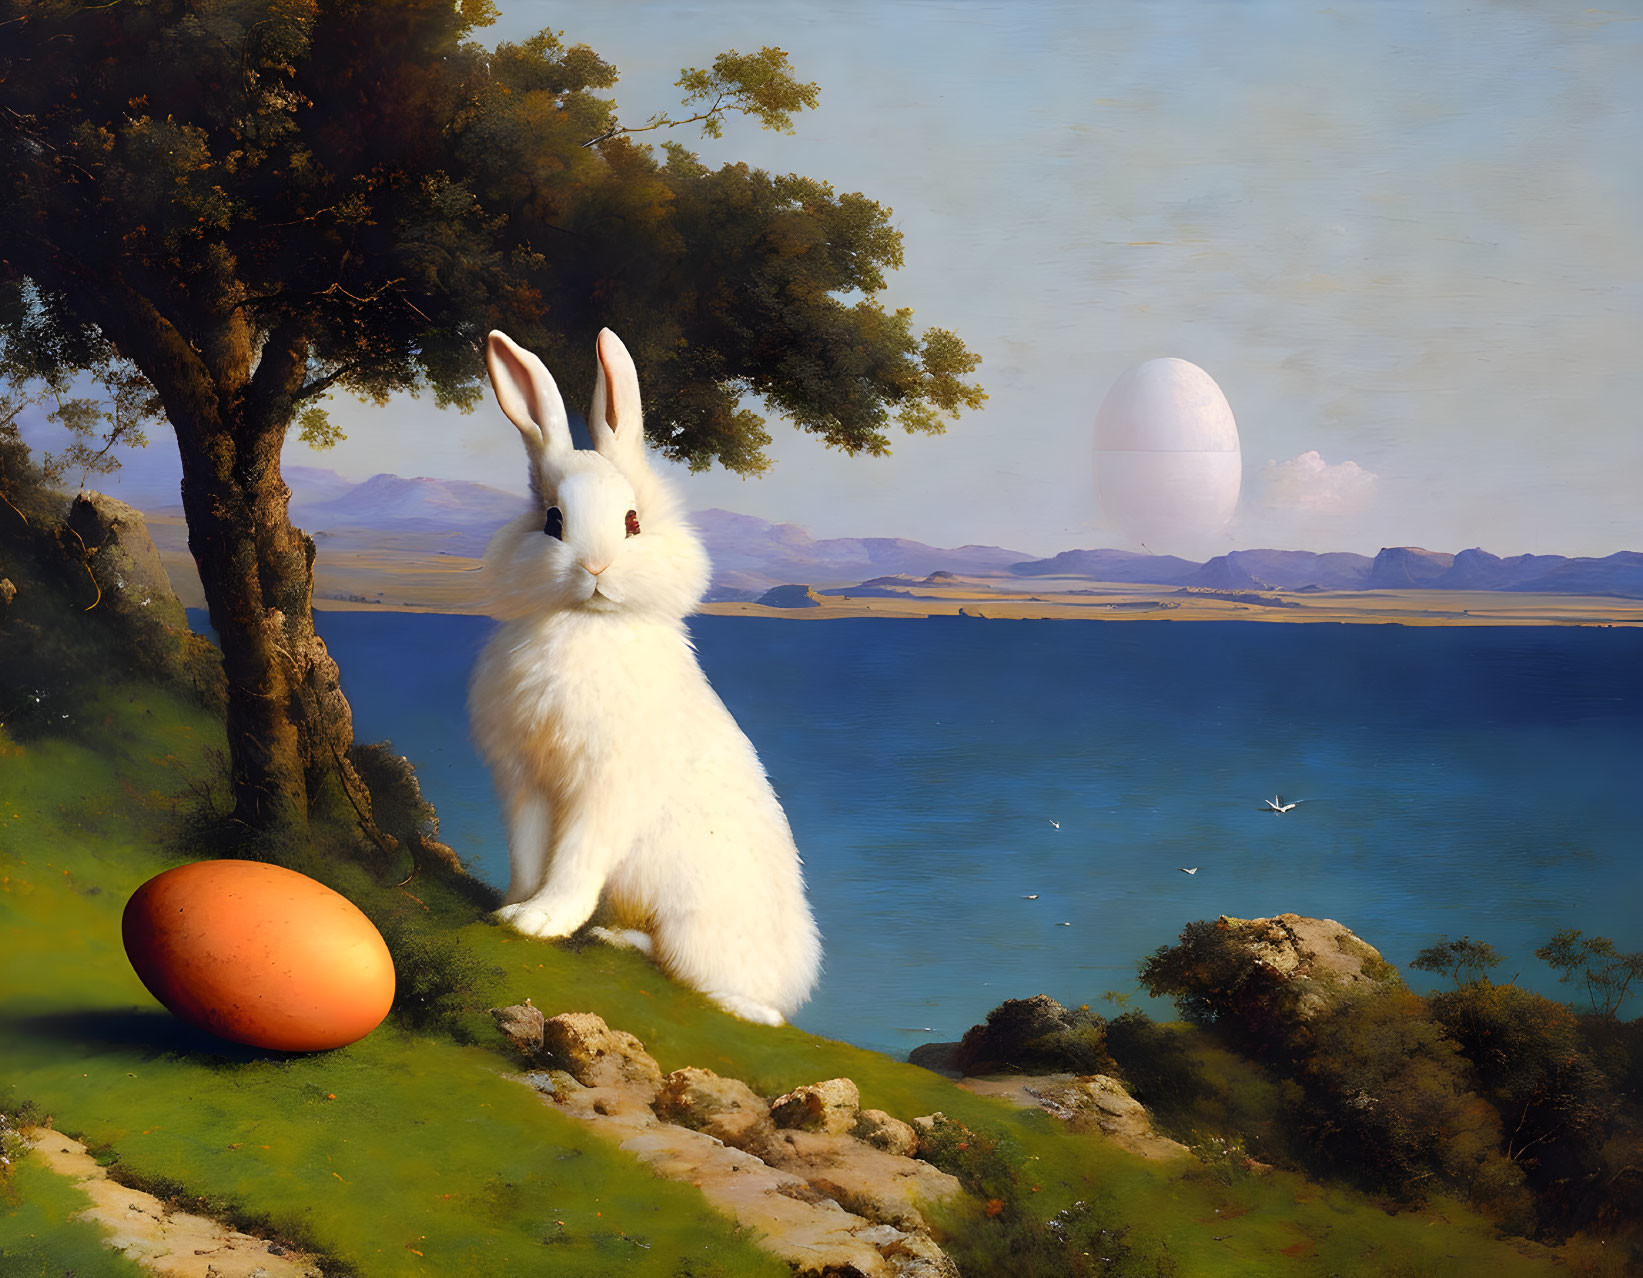 Surreal landscape with giant rabbit, egg, trees, water, and balloon